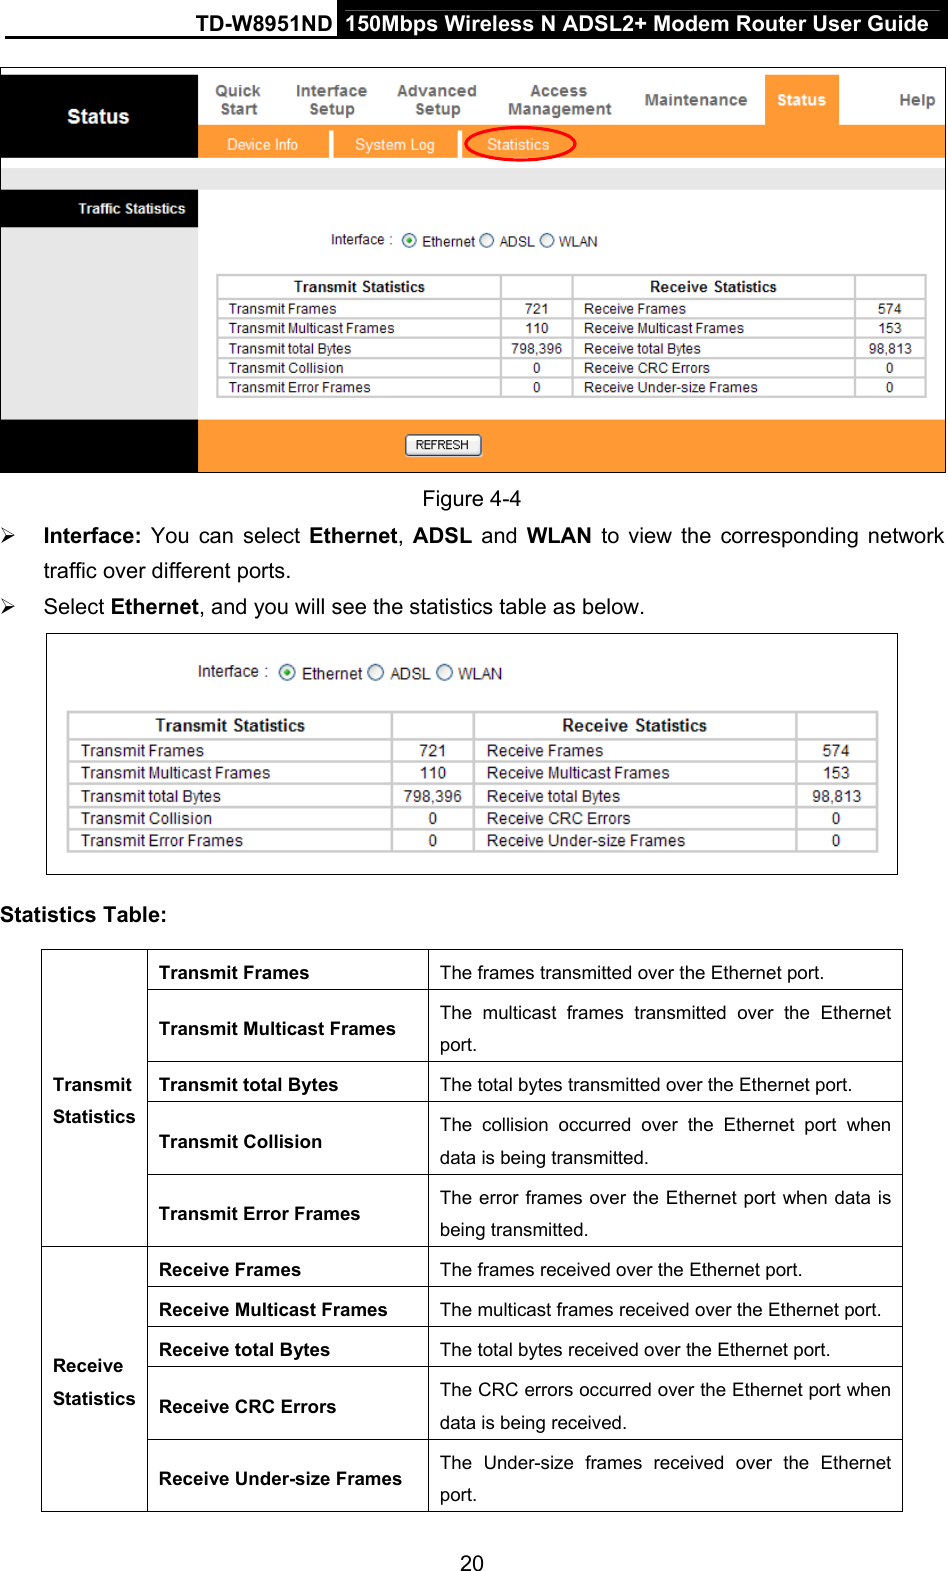 TD-W8951ND  150Mbps Wireless N ADSL2+ Modem Router User Guide  Figure 4-4  Interface:  You can select Ethernet,  ADSL and WLAN to view the corresponding network traffic over different ports.    Select Ethernet, and you will see the statistics table as below.  Statistics Table: Transmit Frames  The frames transmitted over the Ethernet port. Transmit Multicast Frames  The multicast frames transmitted over the Ethernet port. Transmit total Bytes  The total bytes transmitted over the Ethernet port. Transmit Collision  The collision occurred over the Ethernet port when data is being transmitted. Transmit Statistics Transmit Error Frames  The error frames over the Ethernet port when data is being transmitted.   Receive Frames  The frames received over the Ethernet port. Receive Multicast Frames  The multicast frames received over the Ethernet port. Receive total Bytes  The total bytes received over the Ethernet port. Receive CRC Errors  The CRC errors occurred over the Ethernet port when data is being received. Receive Statistics Receive Under-size Frames  The Under-size frames received over the Ethernet port. 20 